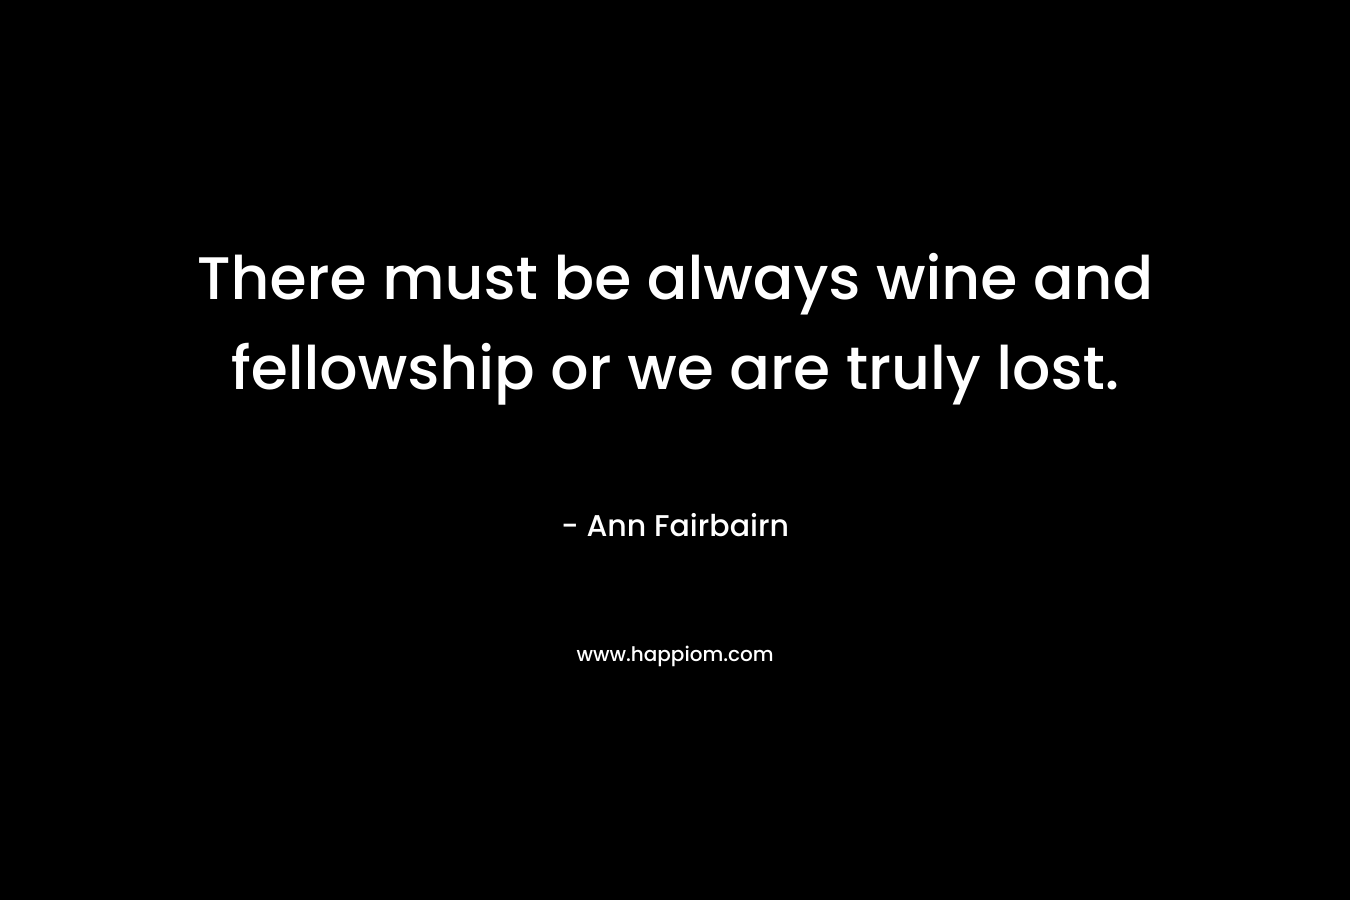 There must be always wine and fellowship or we are truly lost.